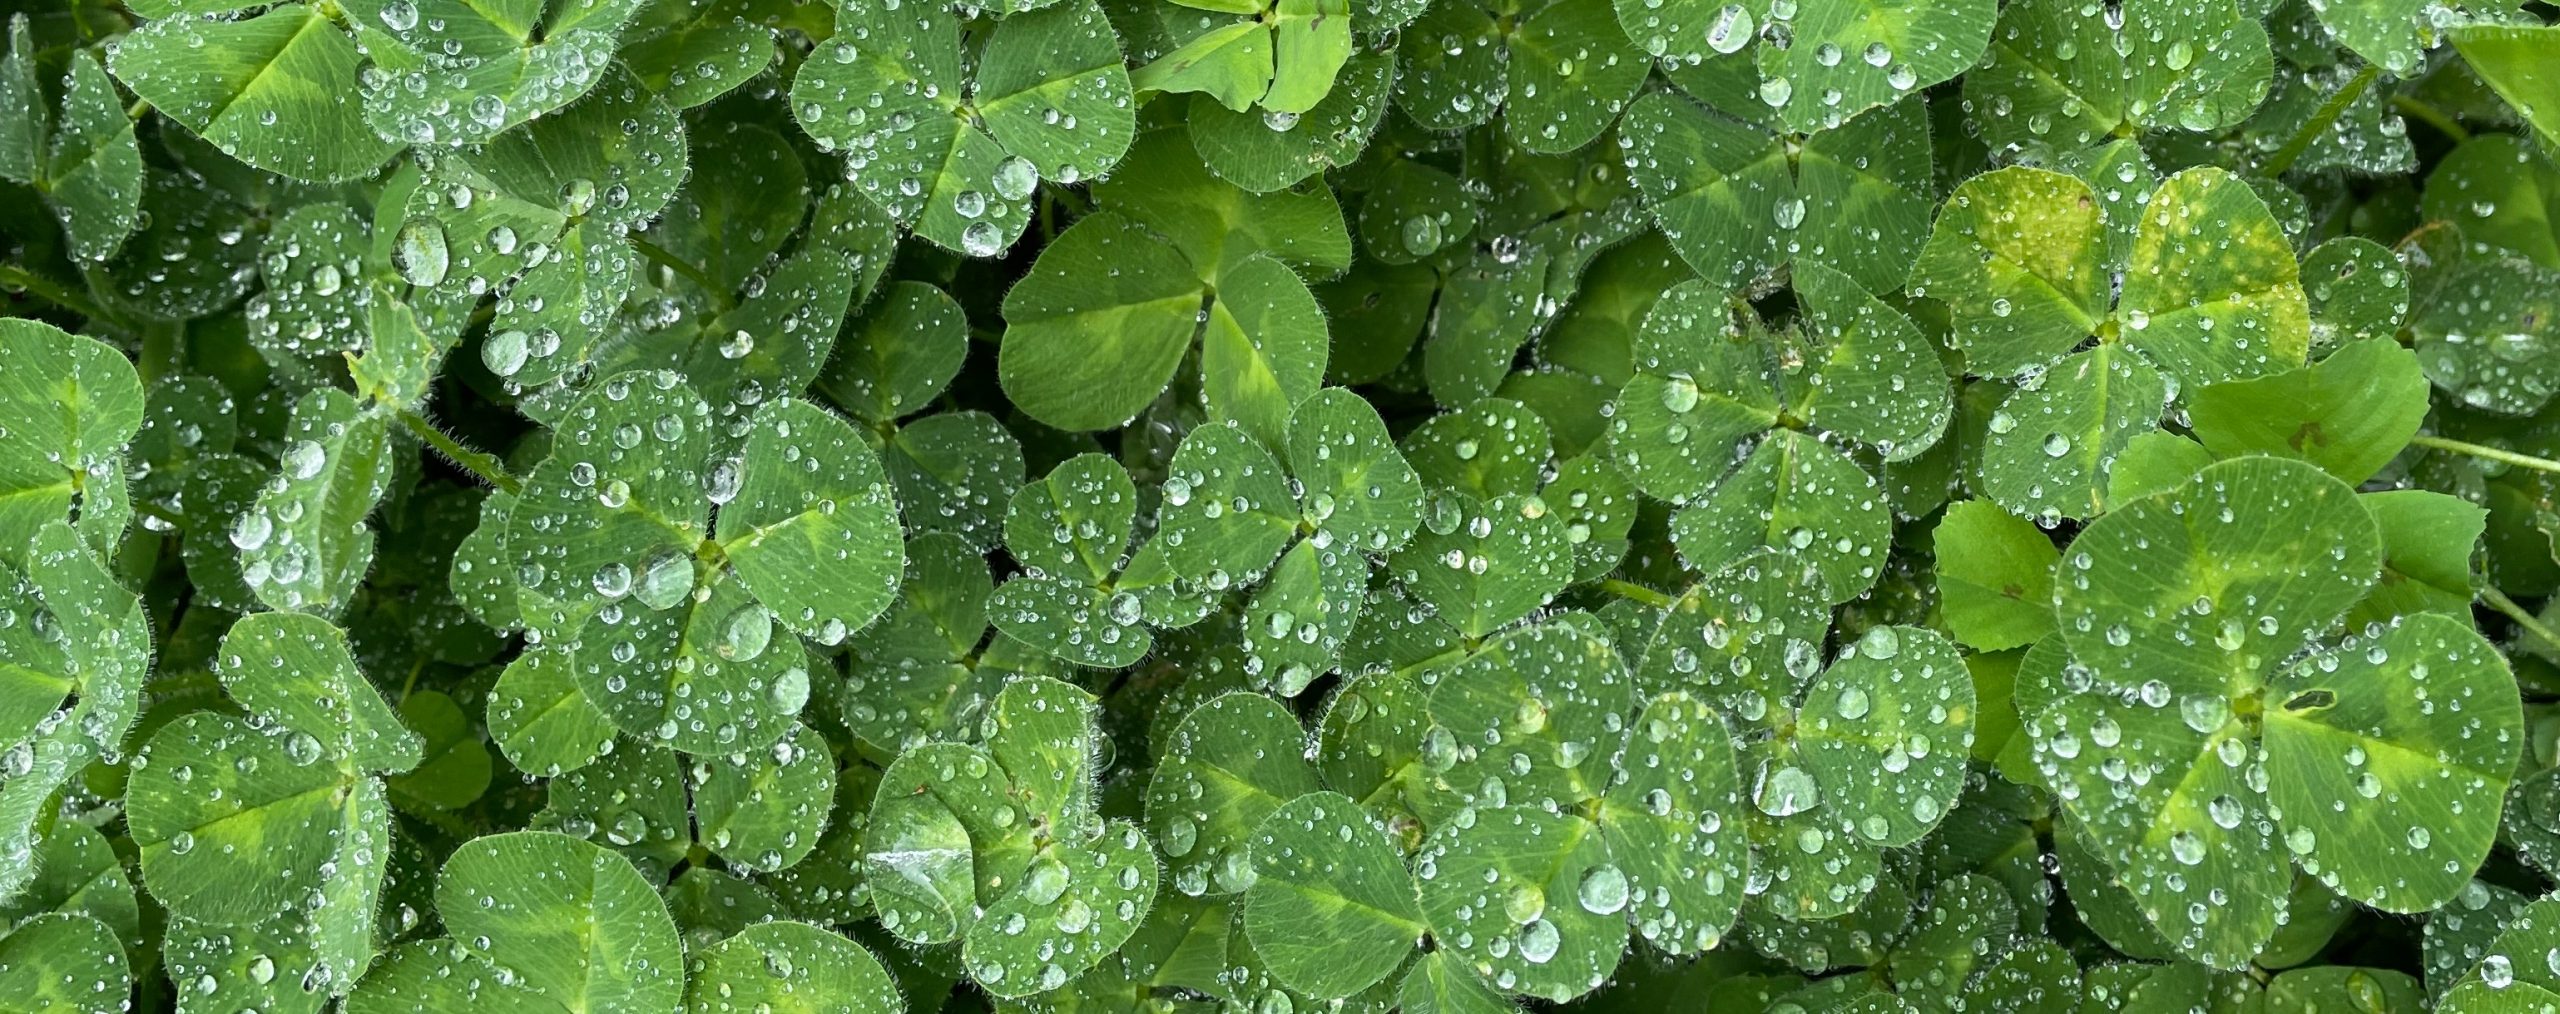 Raindrops on a patch of clover